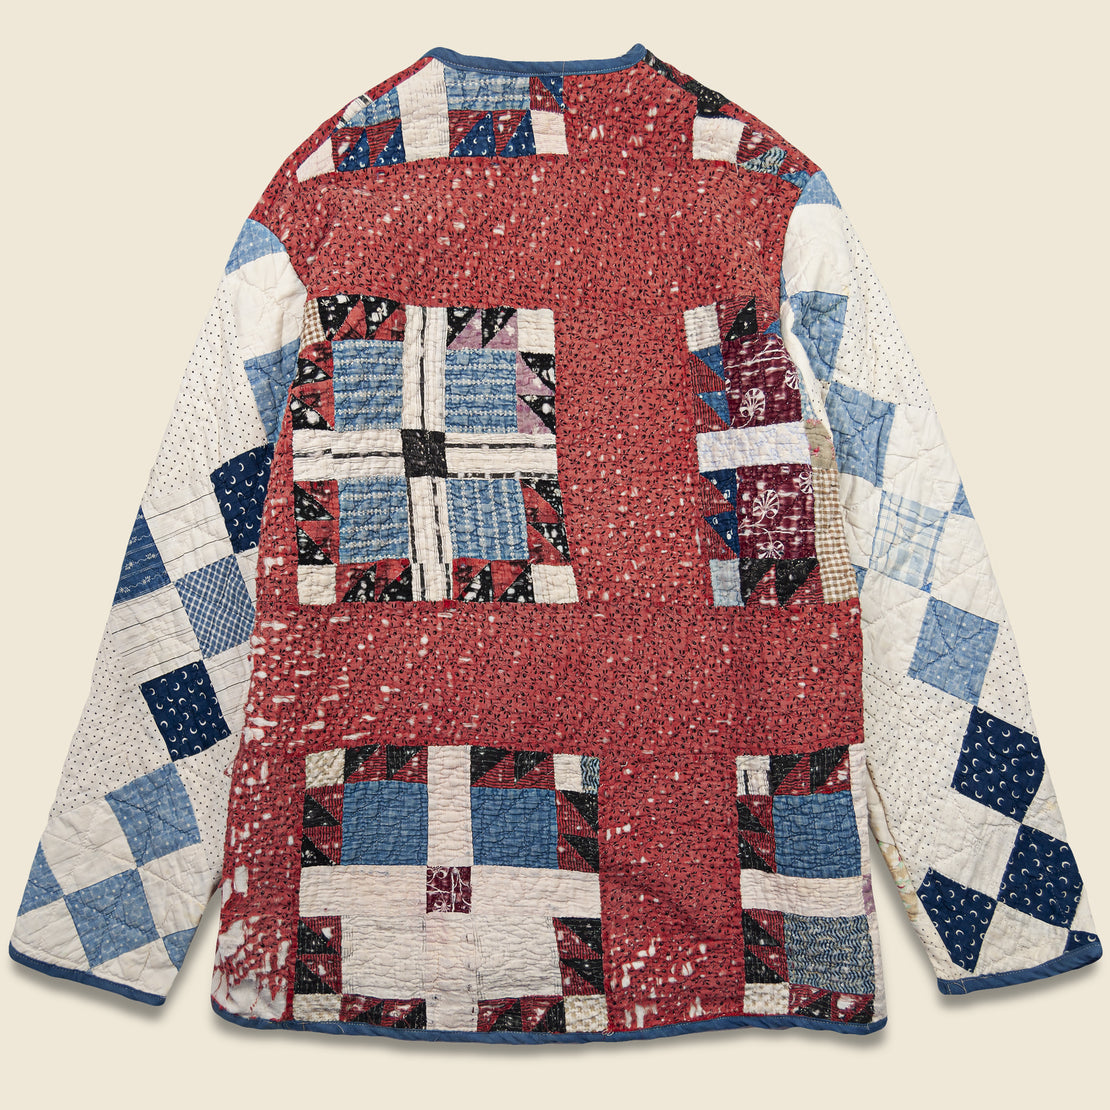 Scofield Cross w/ Indigo Piping Quilt Kimono - Red/White - Vintage - STAG Provisions - W - One & Done - Apparel